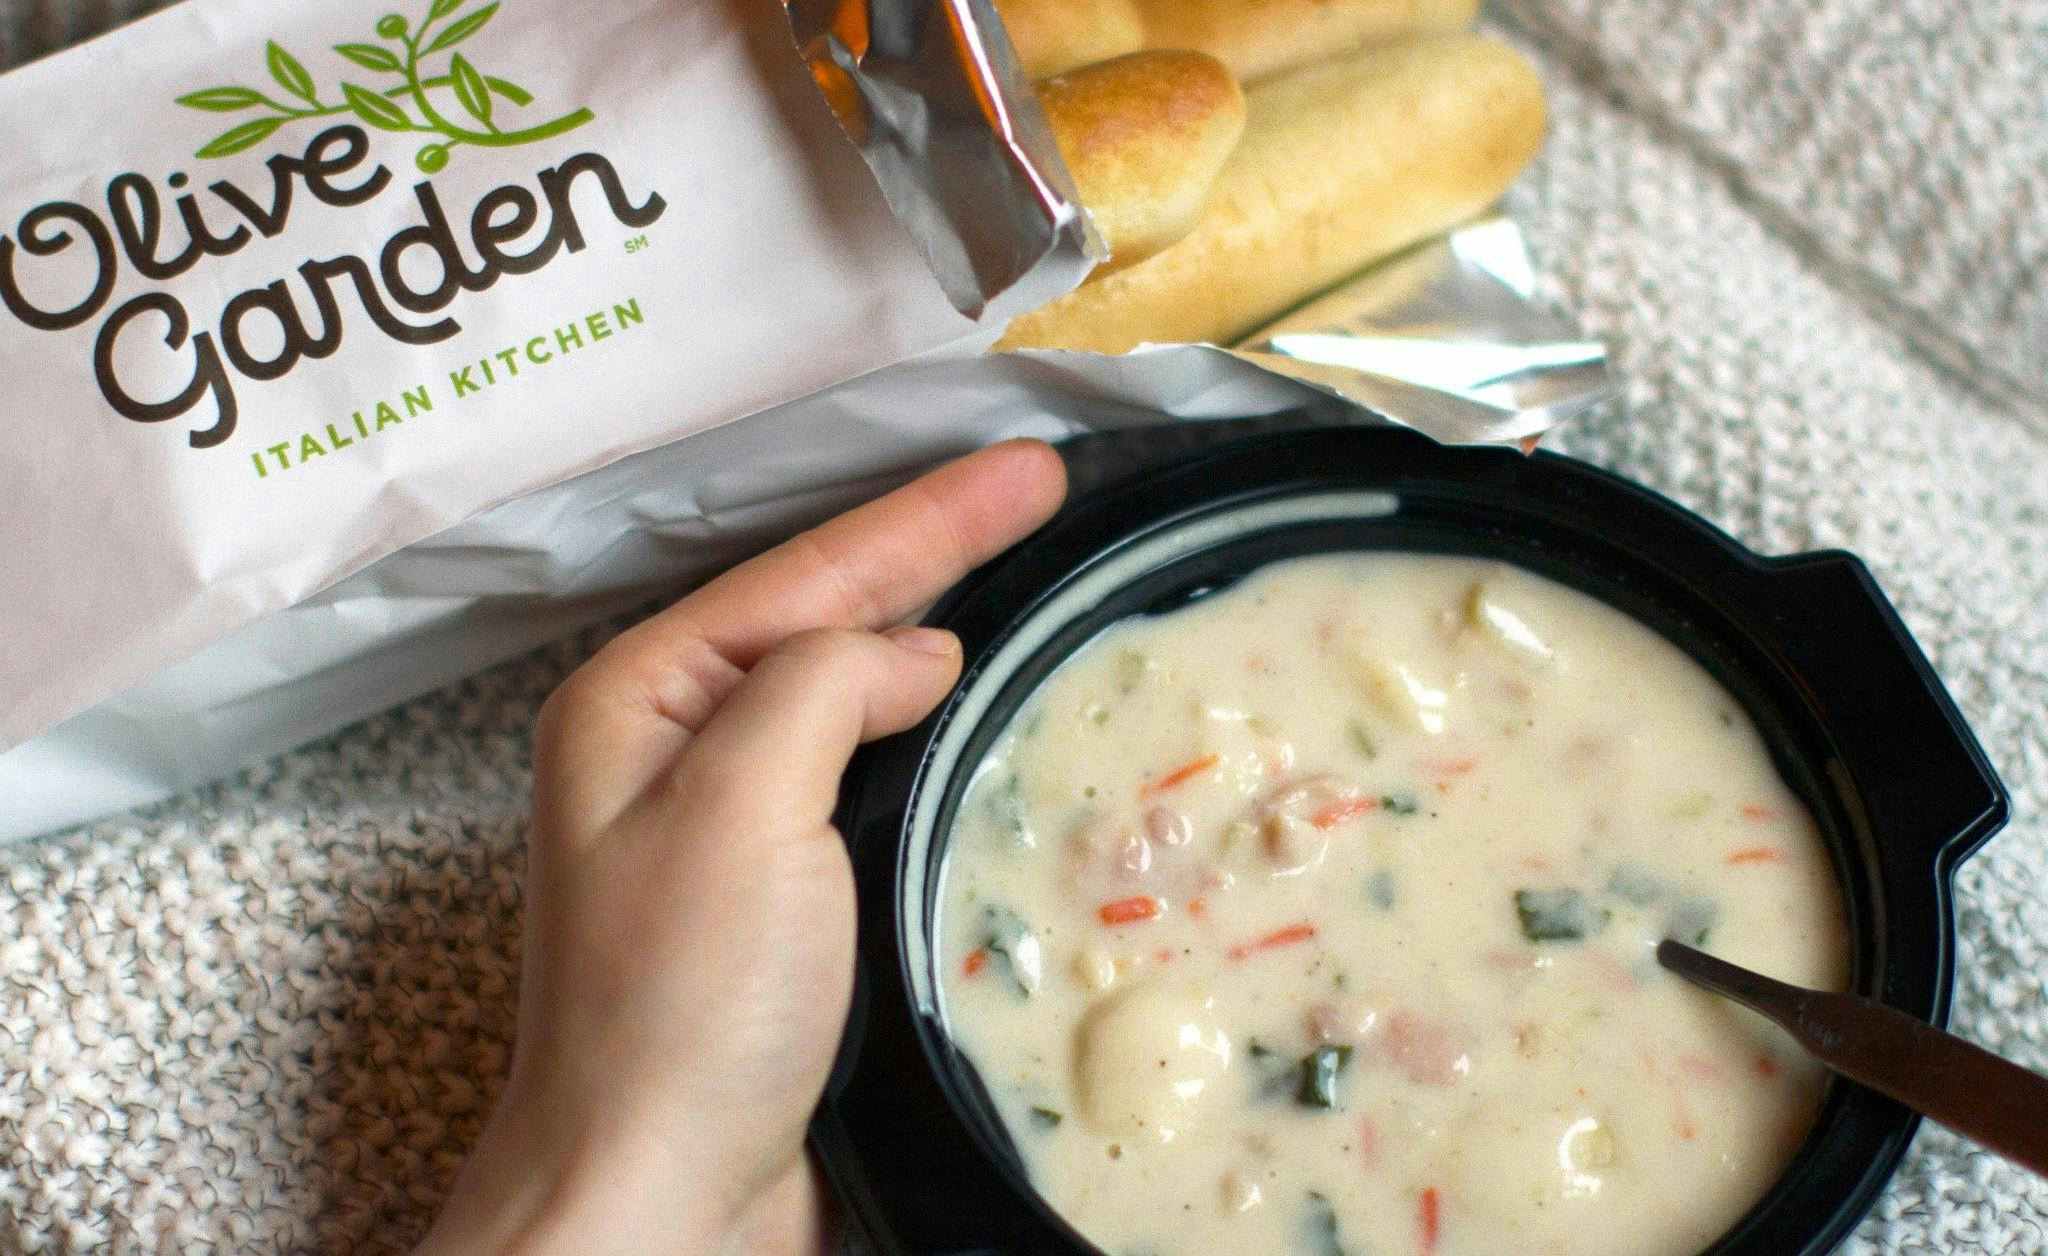 A takeout order of breadsticks and soup from Olive Garden